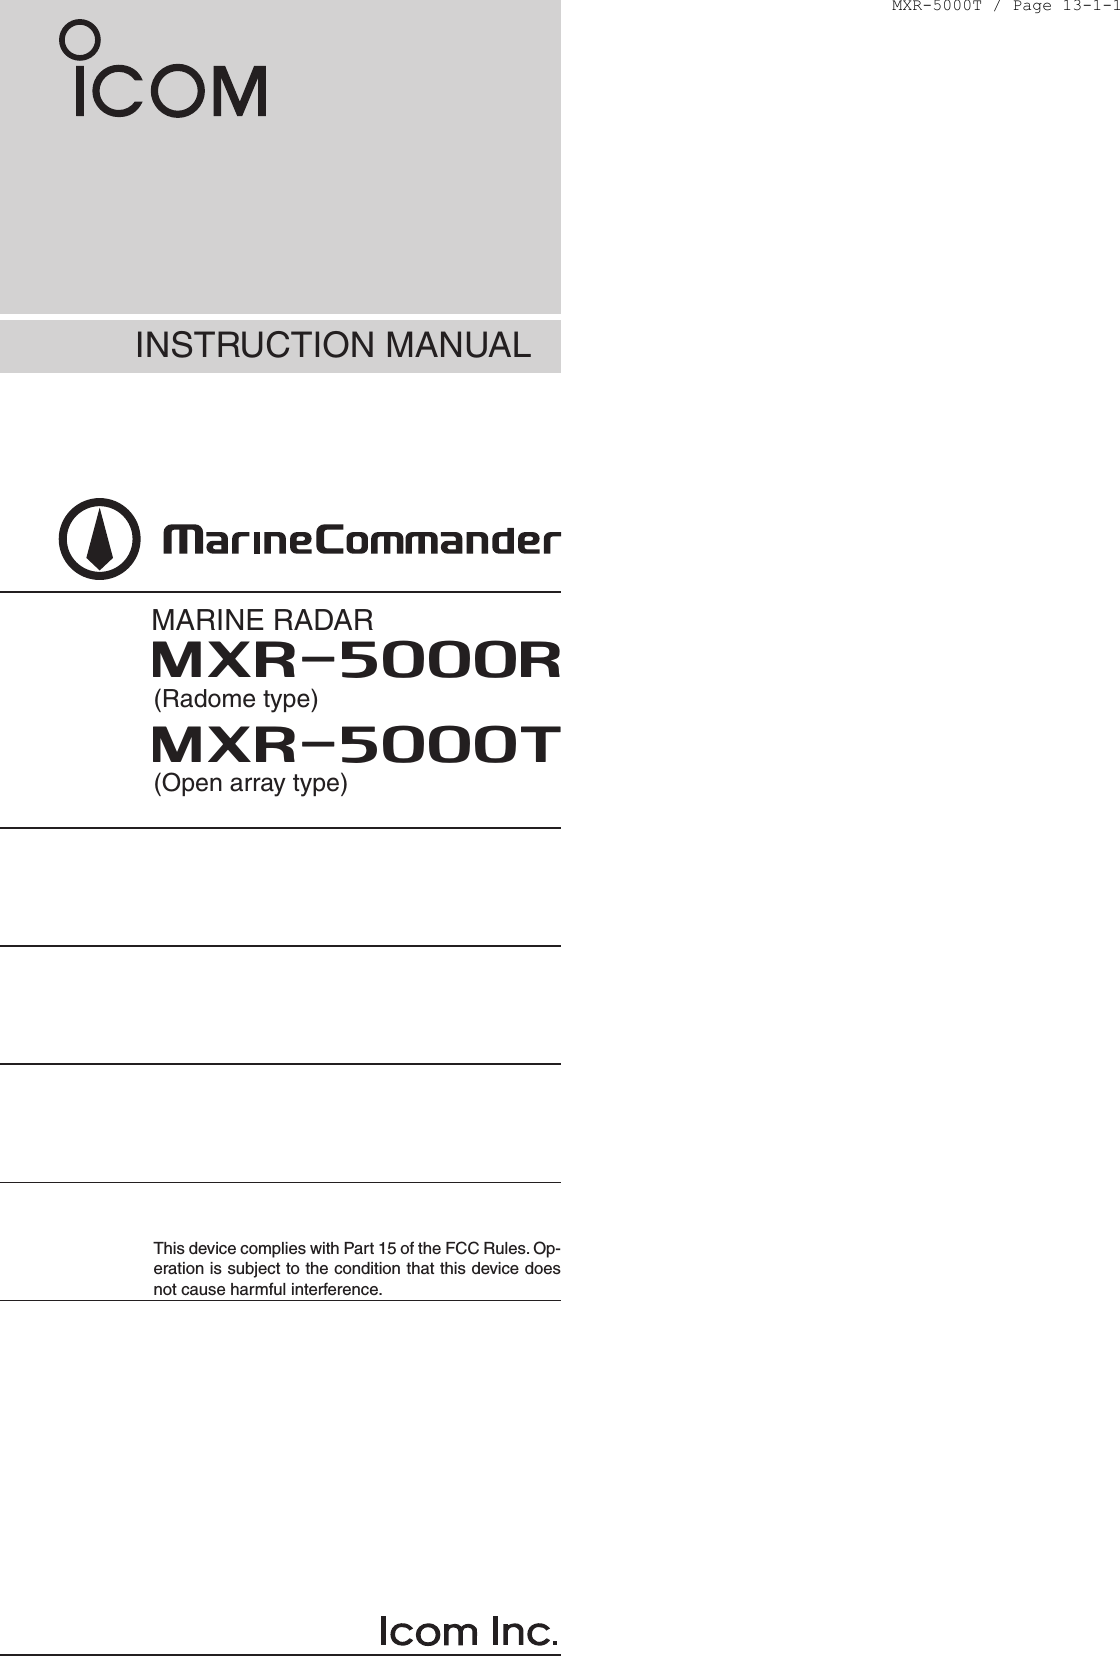 INSTRUCTION MANUALMARINE RADARMXR-5000R(Radome type)MXR-5000T(Open array type)This device complies with Part 15 of the FCC Rules. Op-eration is subject to the condition that this device does not cause harmful interference.MXR-5000T / Page 13-1-1